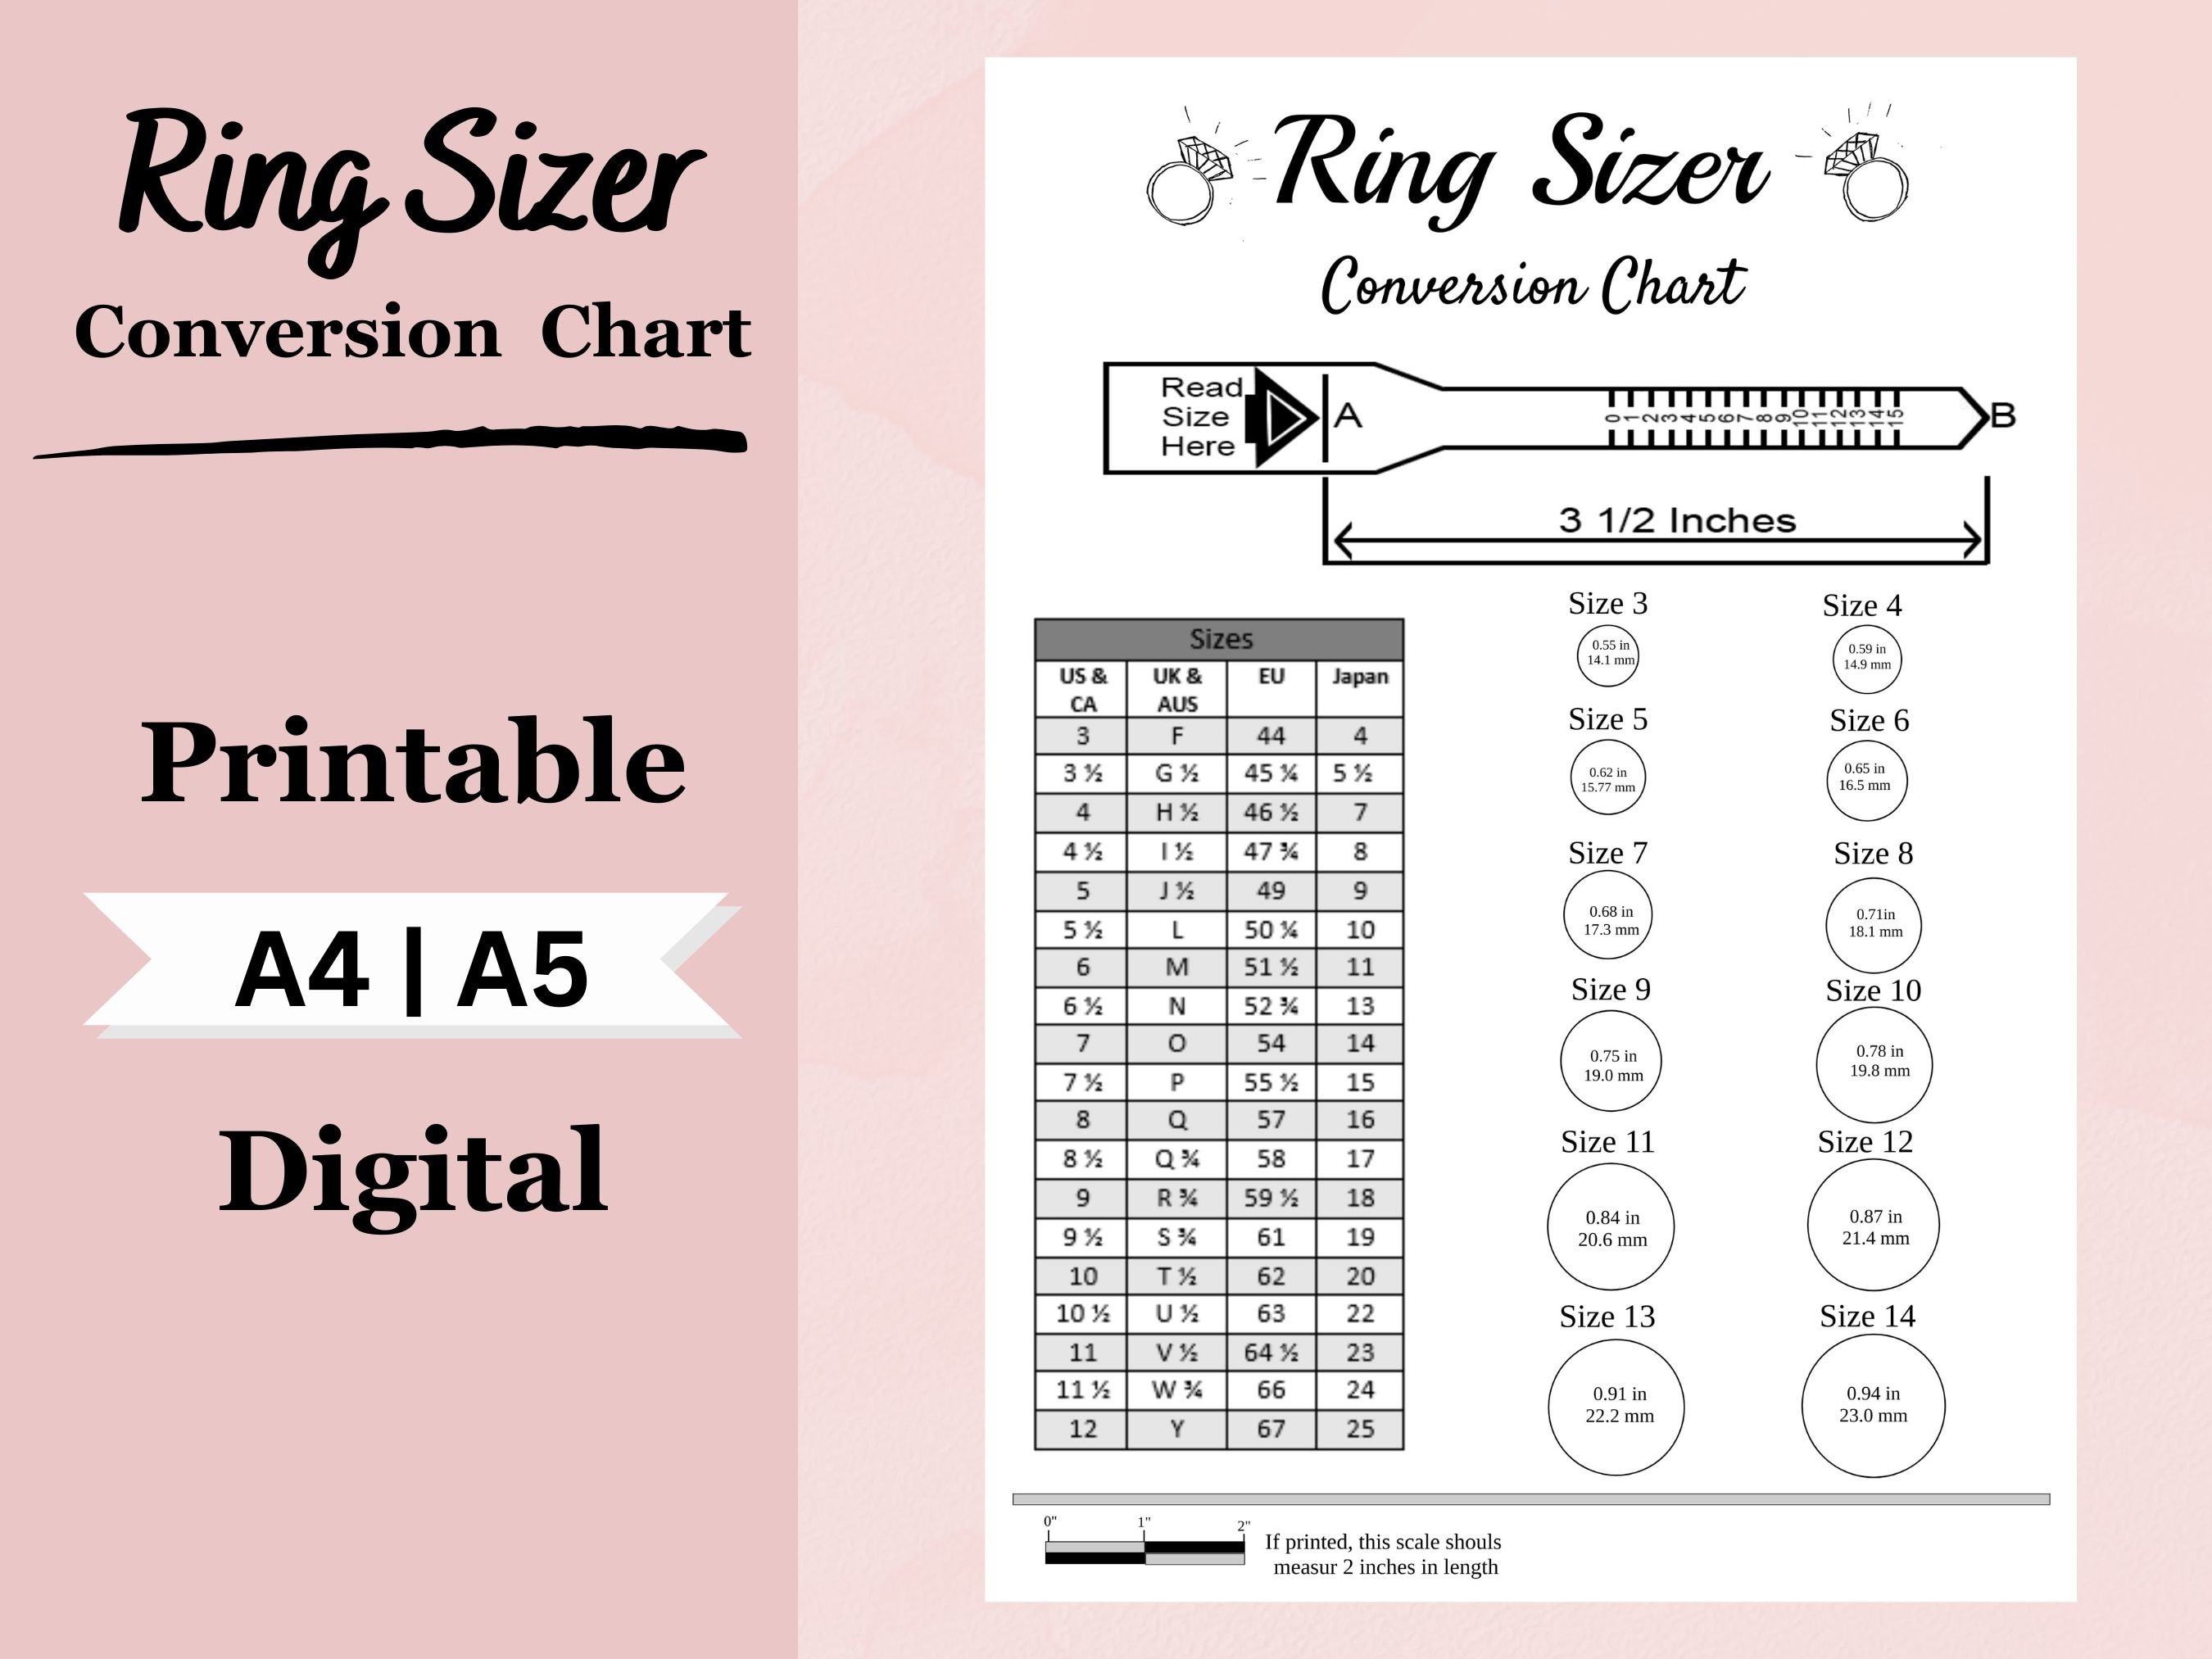 How to Measure Ring Size at Home with String, Printables, & More - Ridge